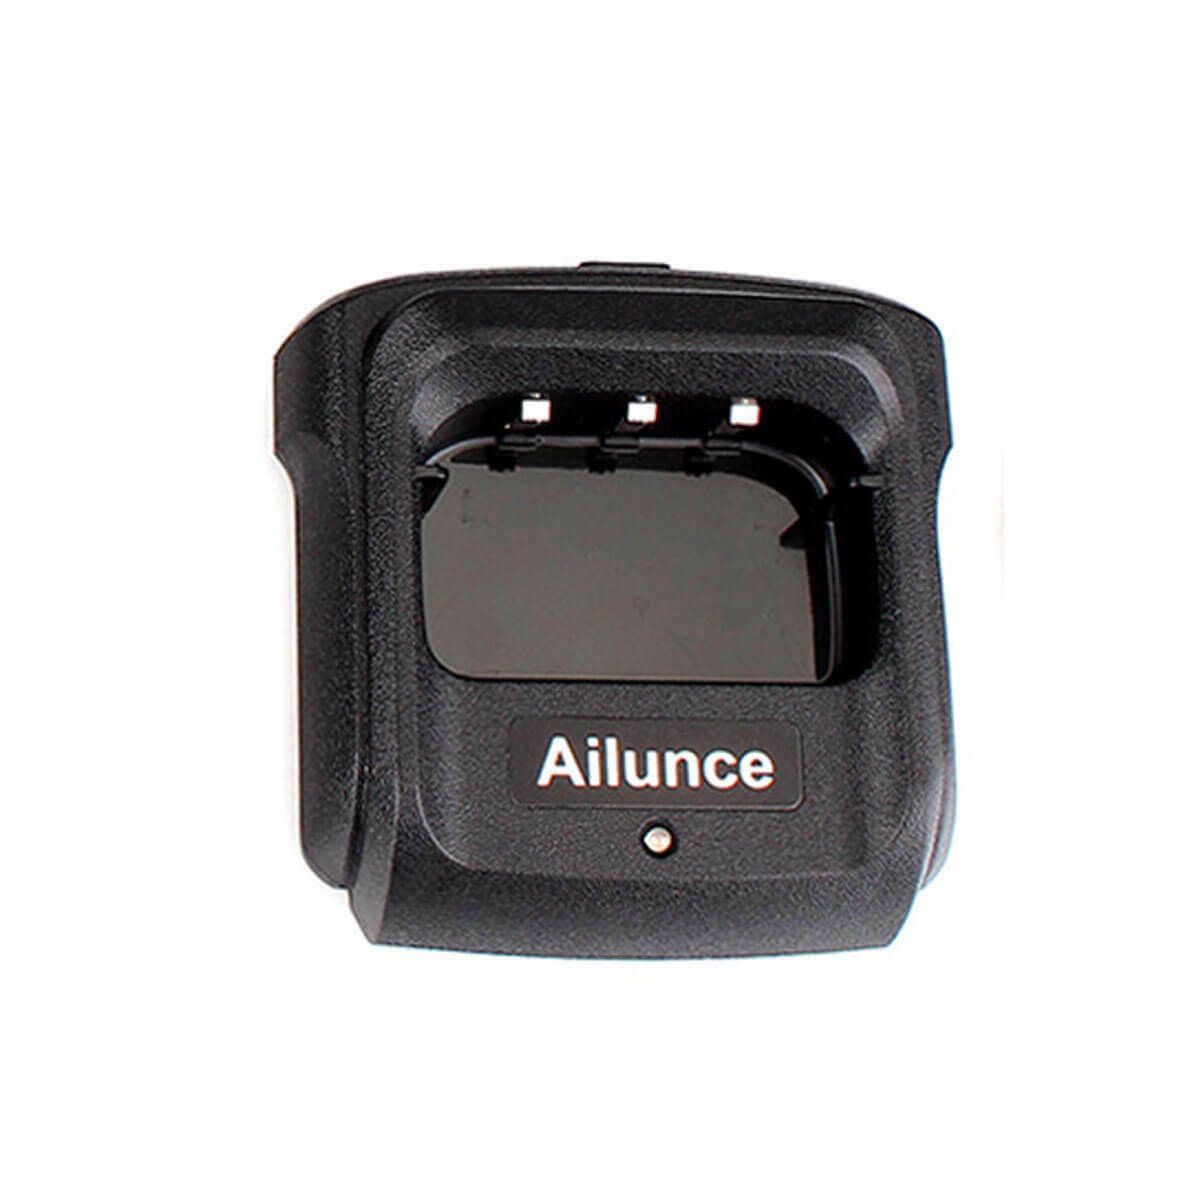 Ailunce HD1 Original Charger Station